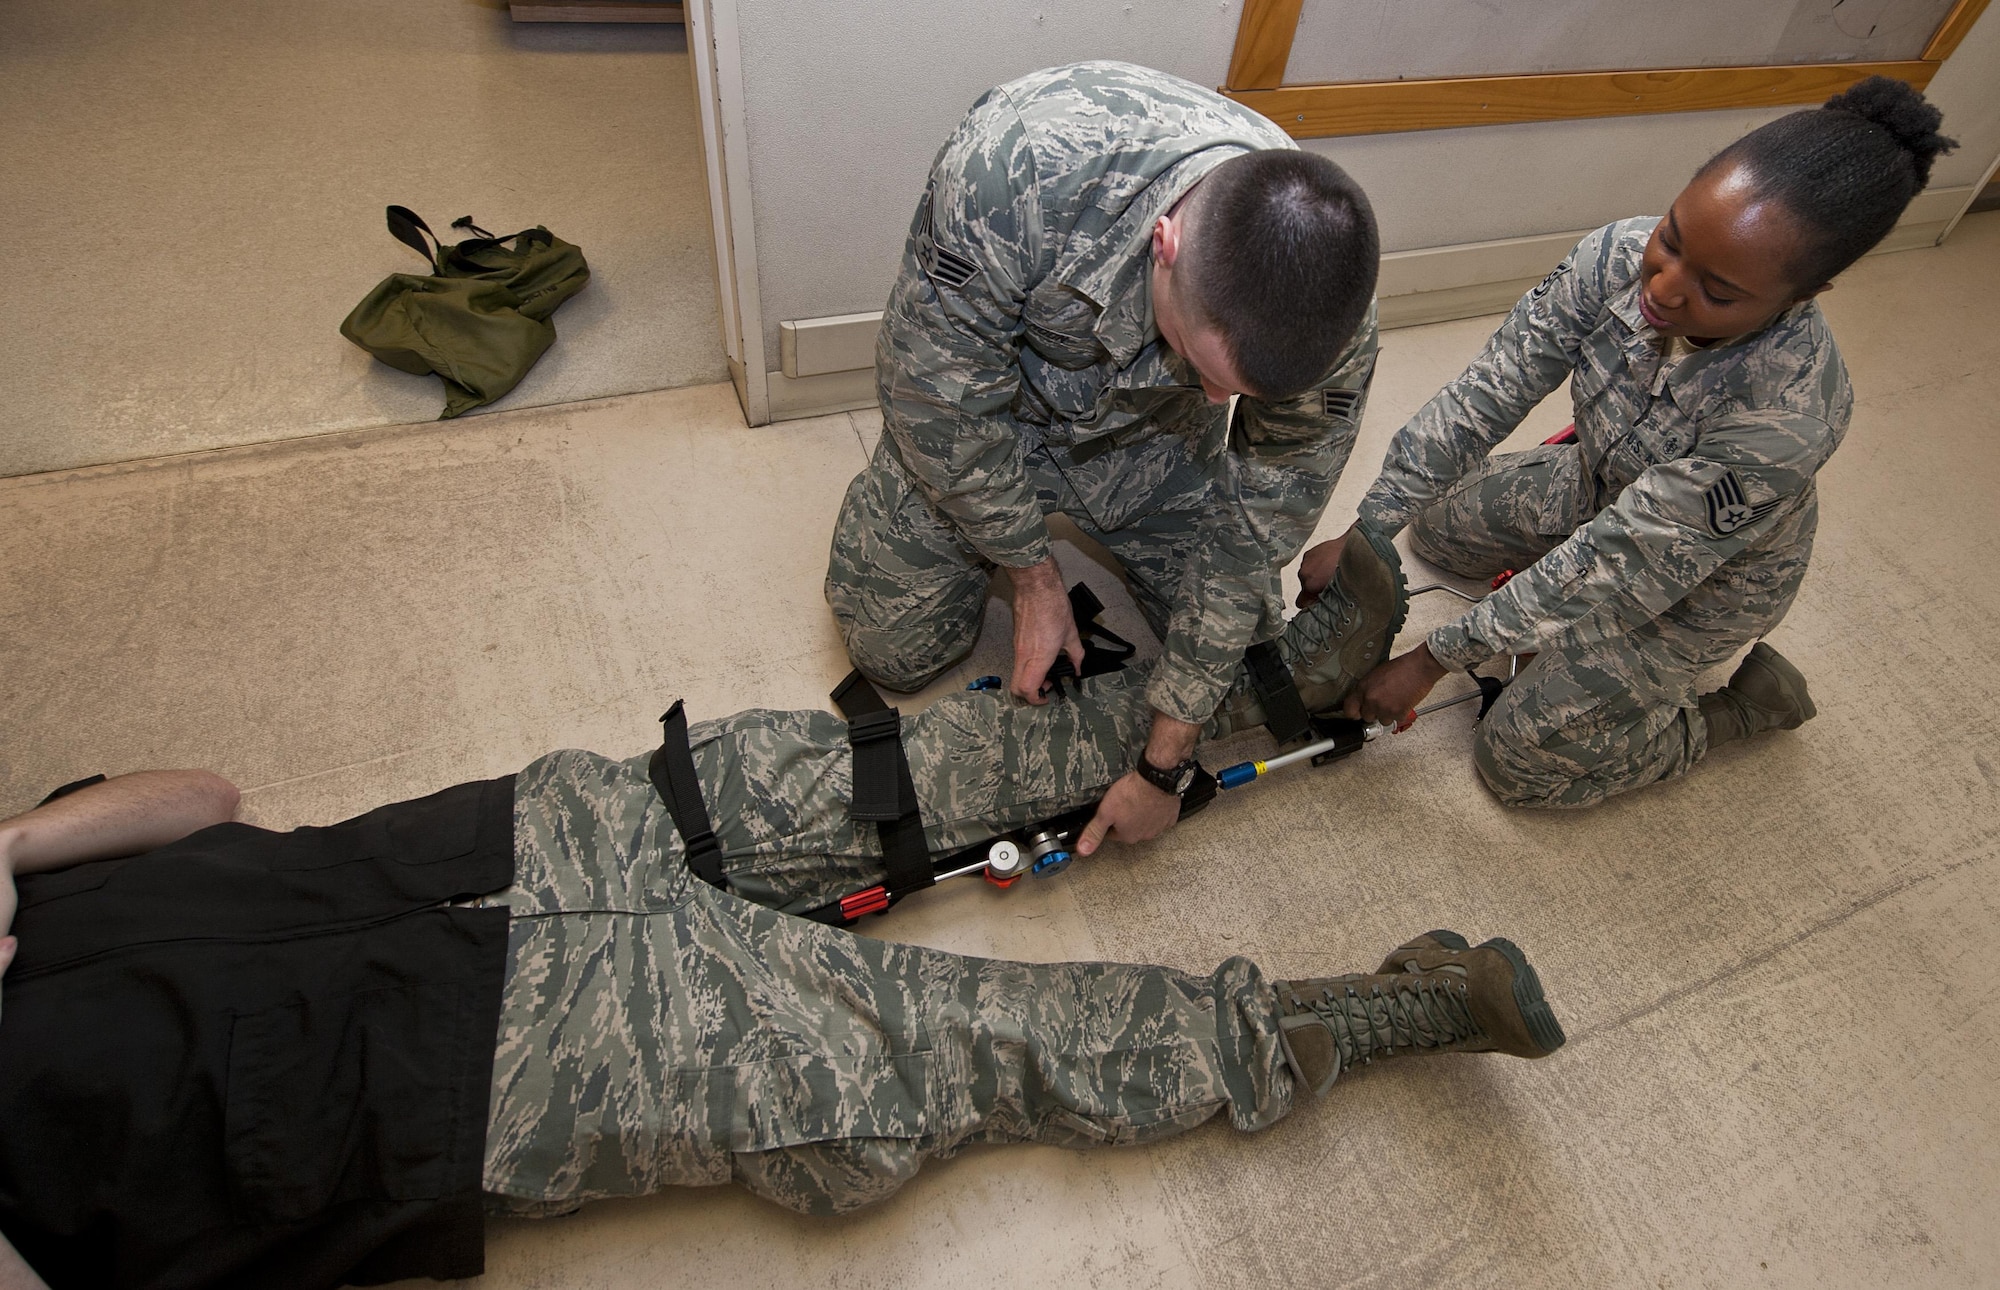 (From left) Senior Airman Robert Moon, 5th Medical Operations Squadron aerospace medical technician, and Staff Sgt. Afsatu Kamara, 5 MDOS emergency medical technician, connect a traction splint to a simulated patient at Minot Air Force Base, N.D., Dec. 1, 2016. Ambulance services Airmen use traction splints to reduce pain, realign limbs and minimize a patient’s vascular and neurological complications. (U.S. Air Force photo/Airman 1st Class Jonathan McElderry)